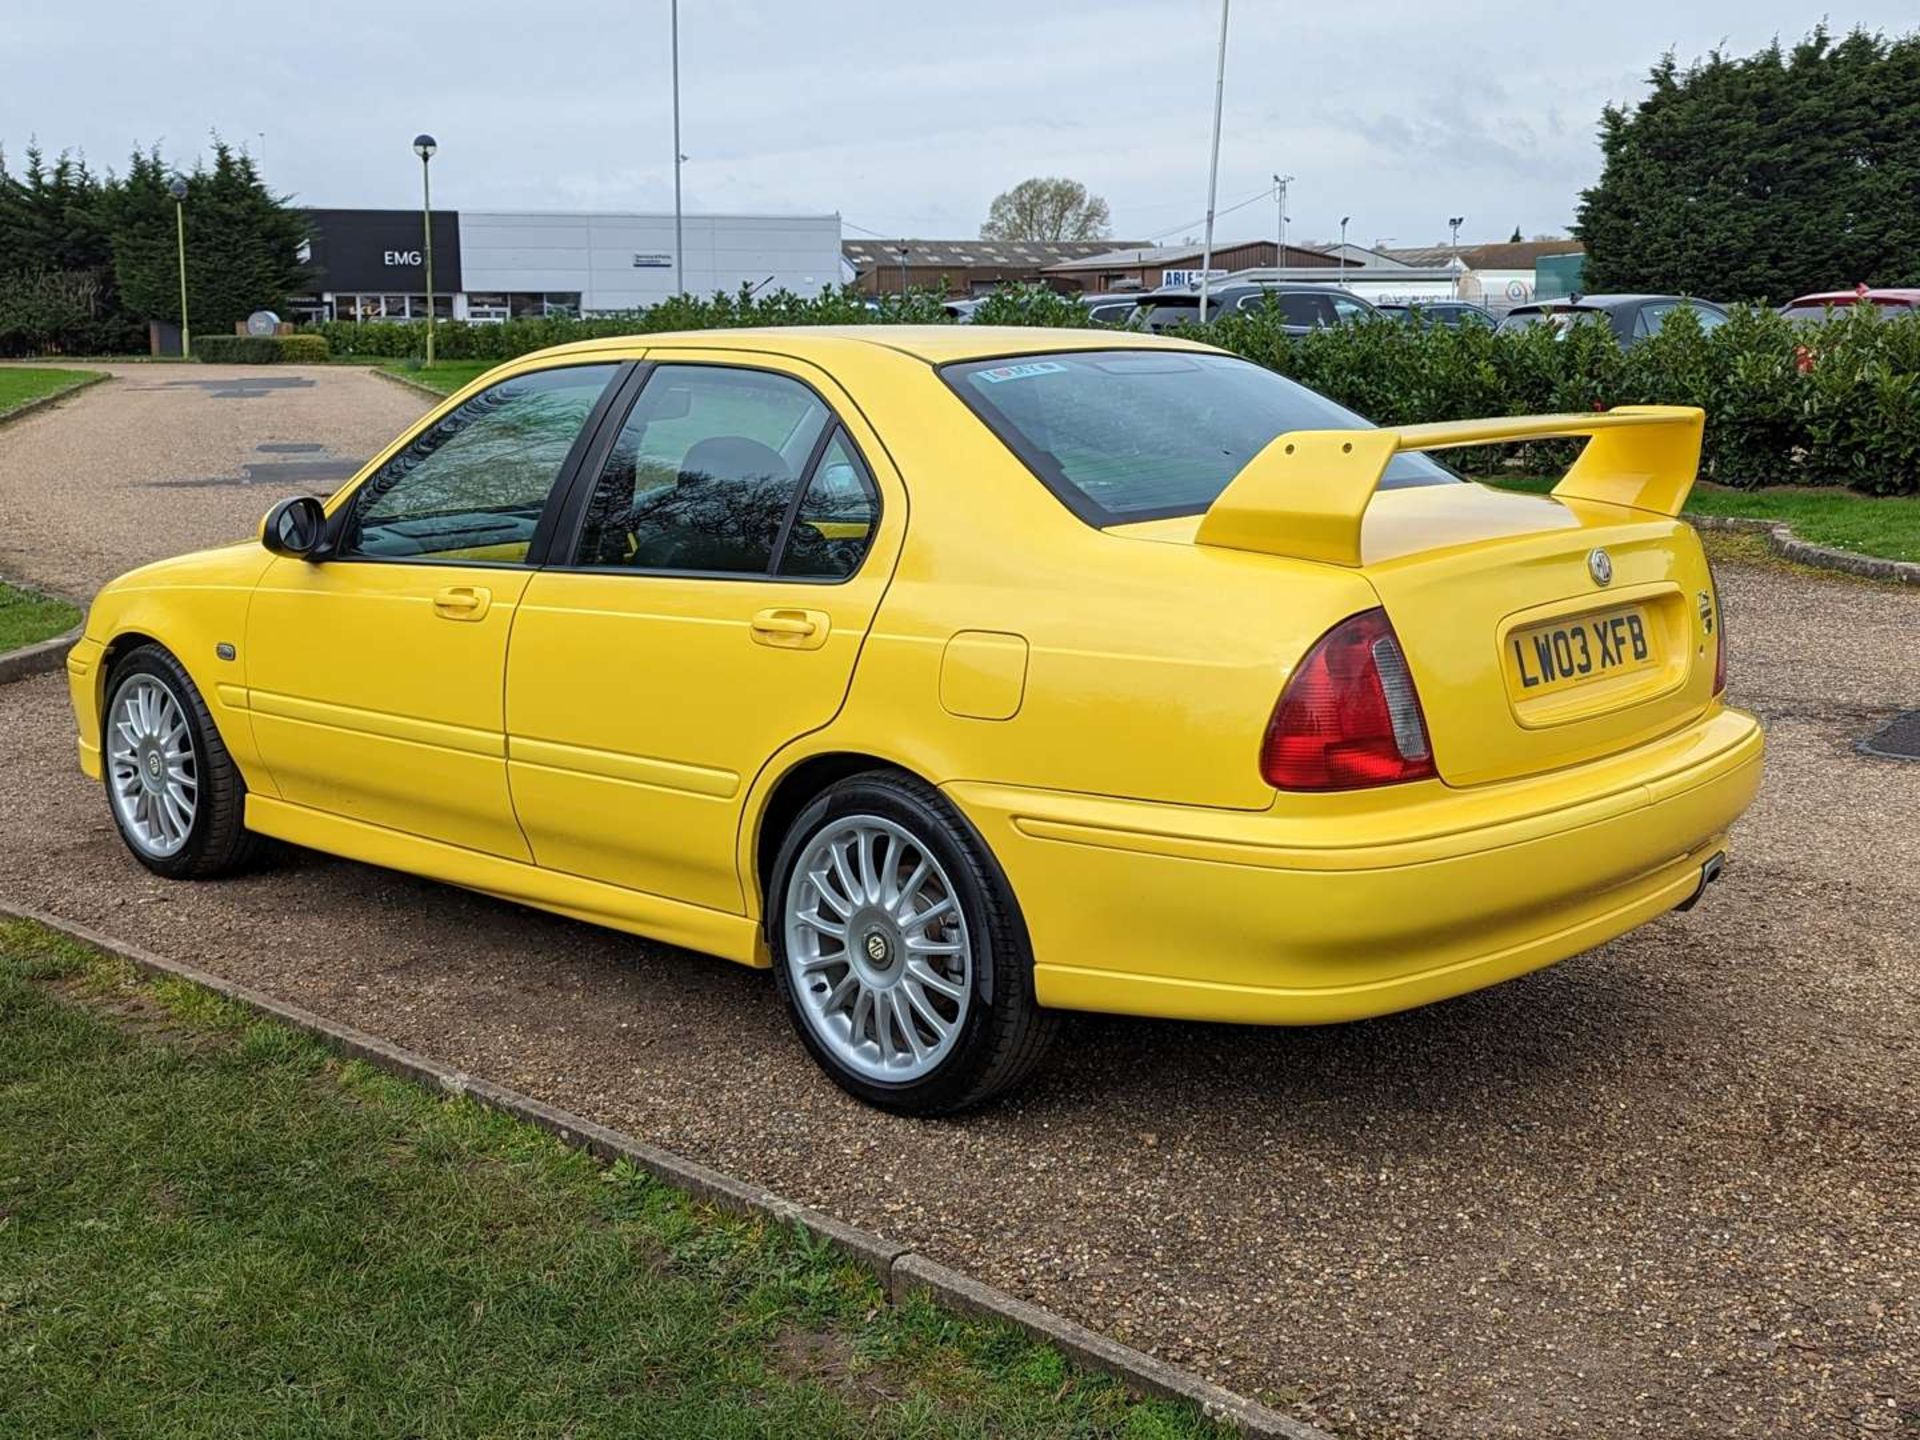 2003 MG ZS 180&nbsp; - Image 5 of 30